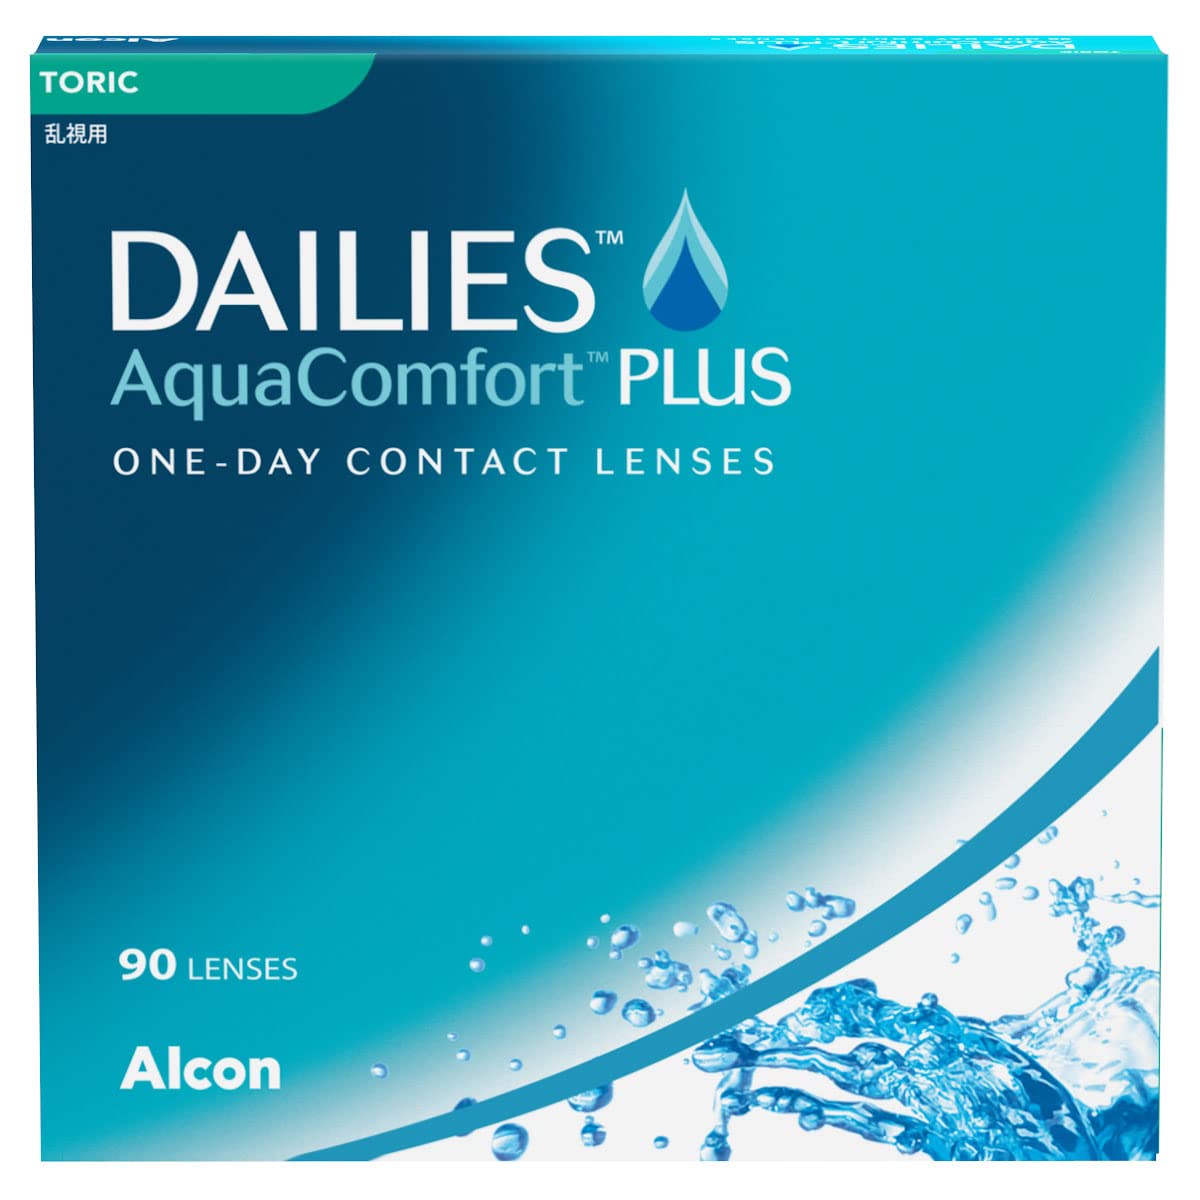 Dailies AquaComfort Plus Toric Tageslinsen weich, 90 Stück, BC 8.8 mm, DIA 14.4 mm, CYL -0.75, ACHSE 180, -3.75 Dioptrien